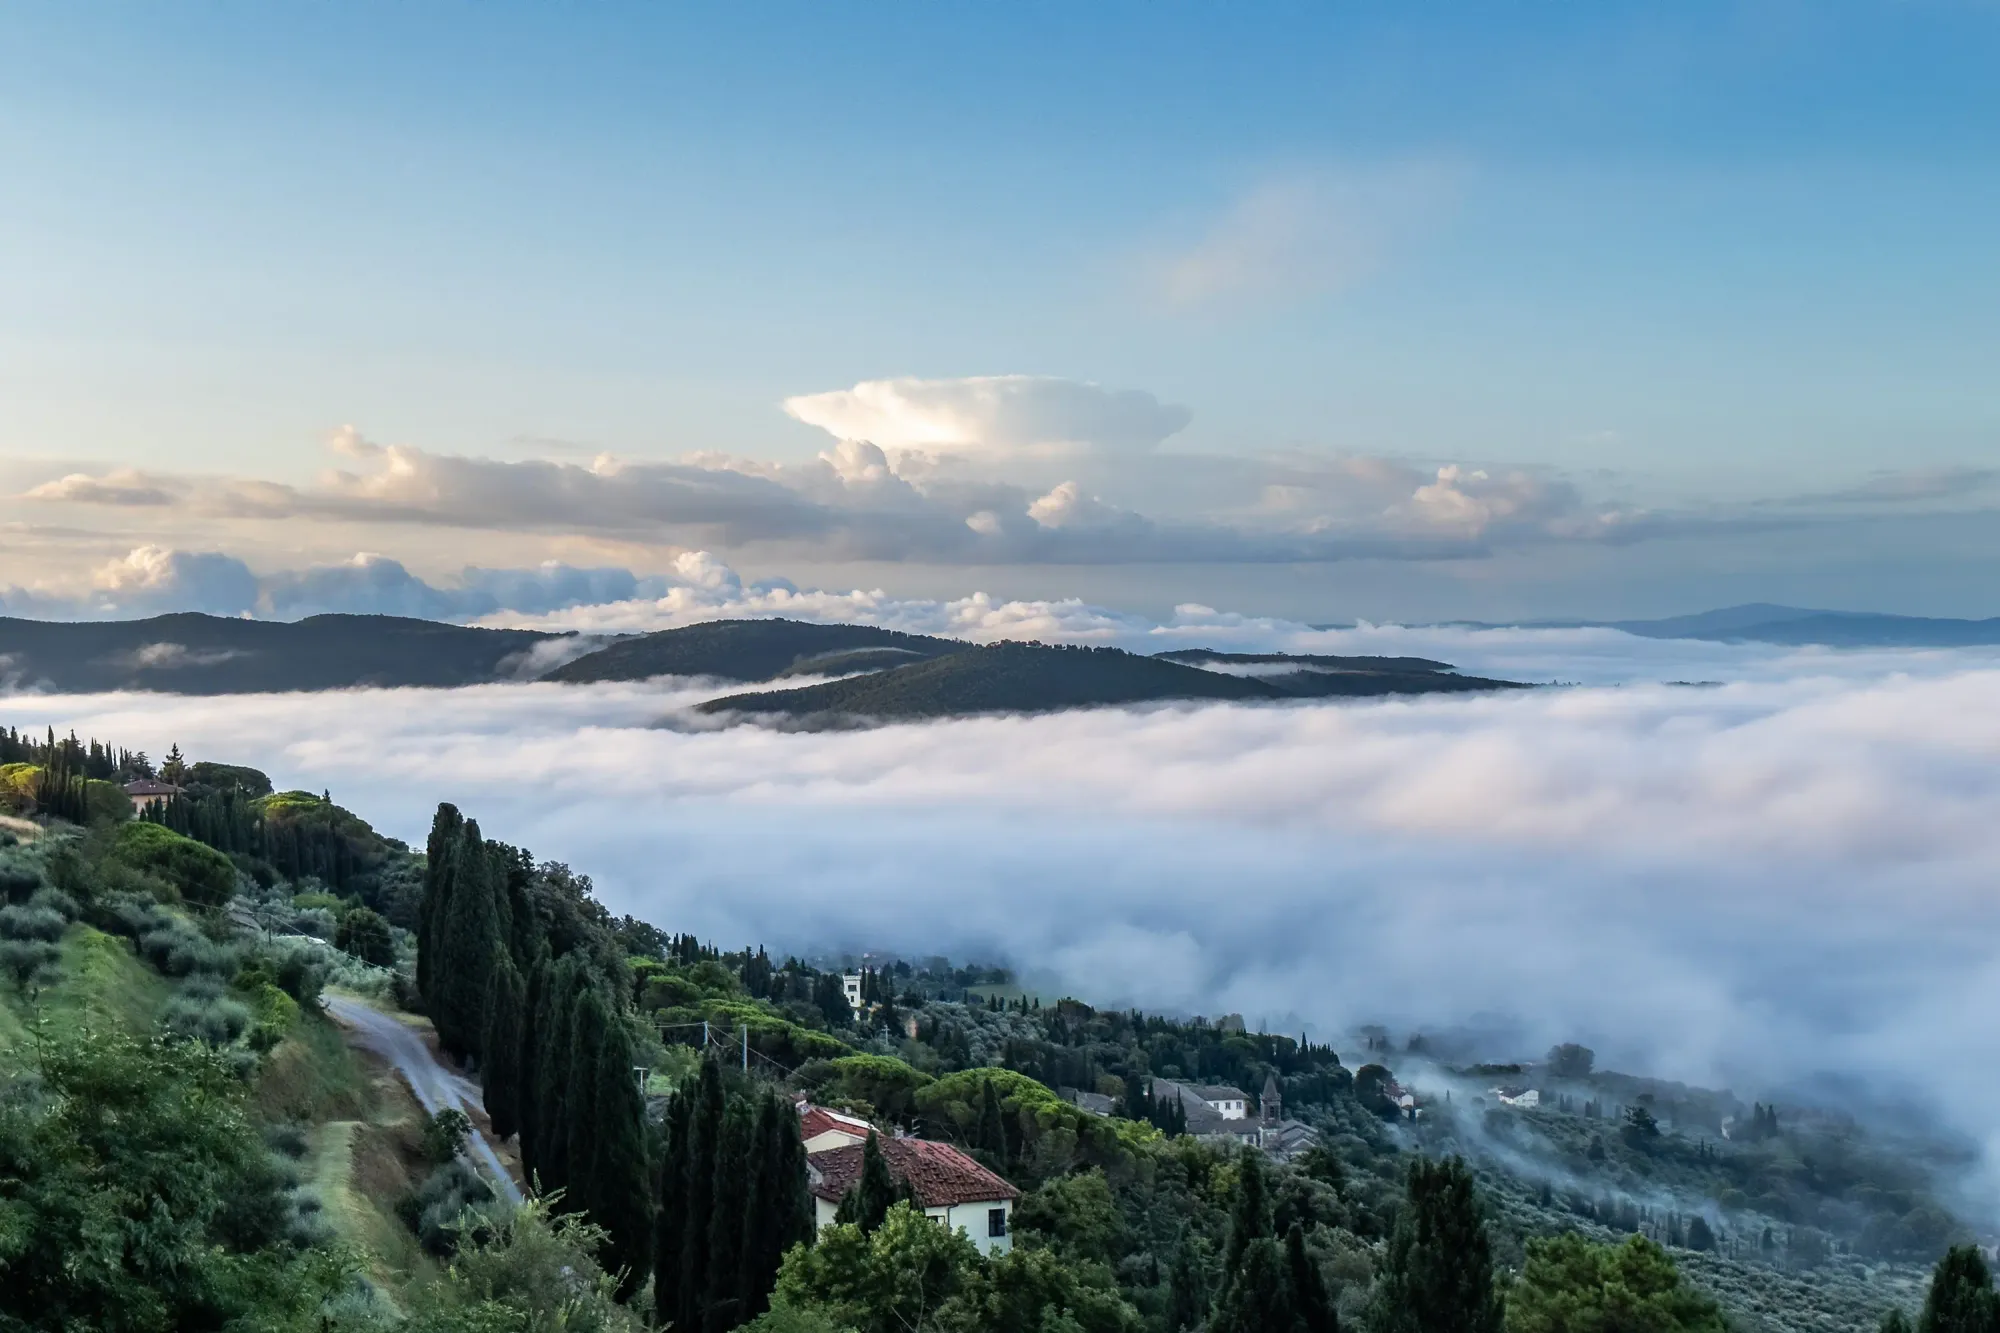 A rare cloud-filled valley effect below Cortona, Italia on August 5, 2023.